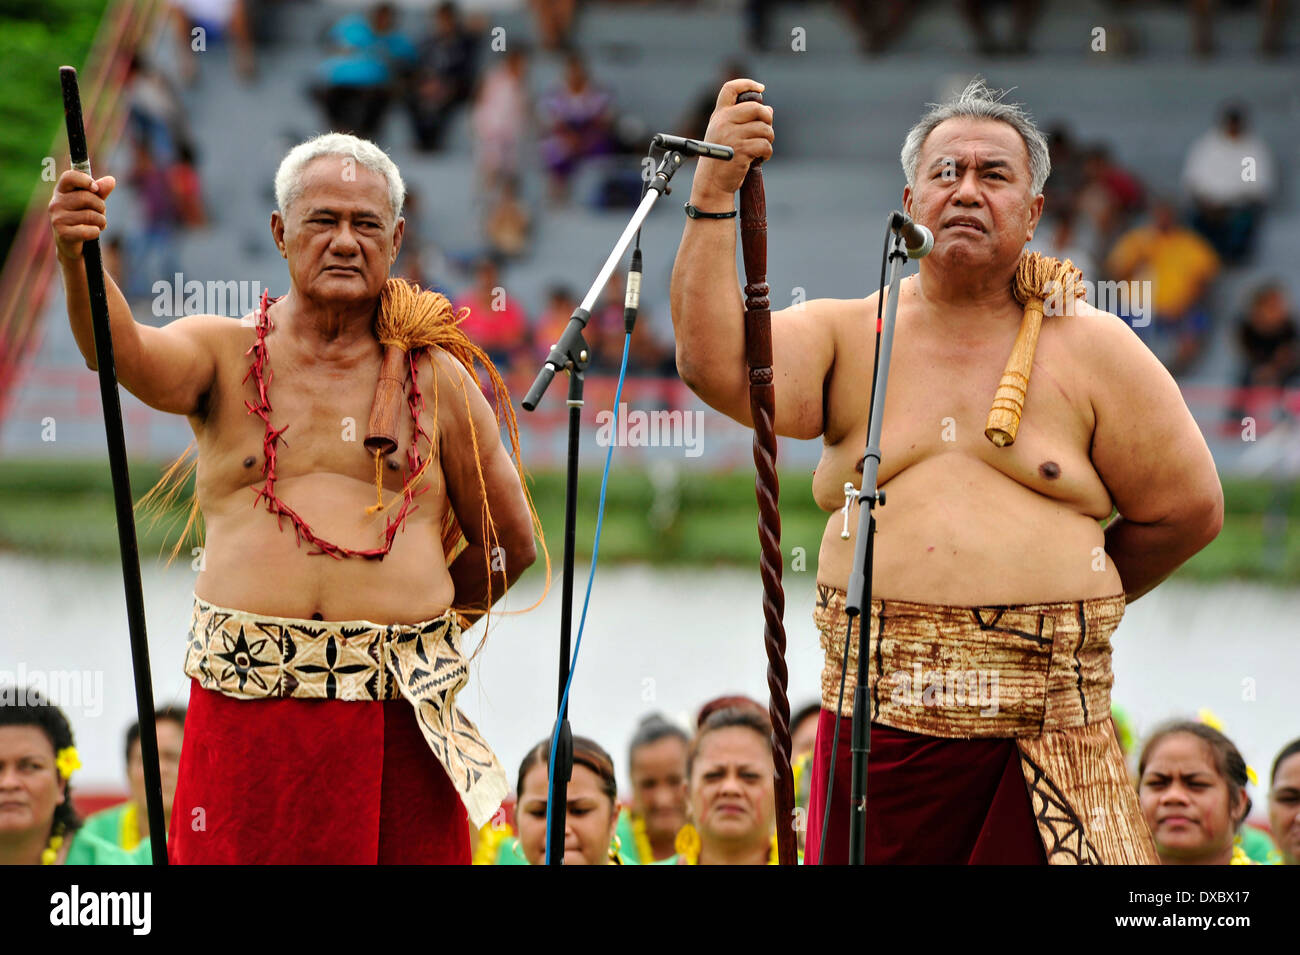 American Samoa Governor Togiola Tulafono, left, dressed in traditional Samoan lava-lava while a matai speaks for the high chief during Flag Day celebrations at Veterans Memorial Stadium April 18, 2010 in Tafuna, American Samoa. Stock Photo